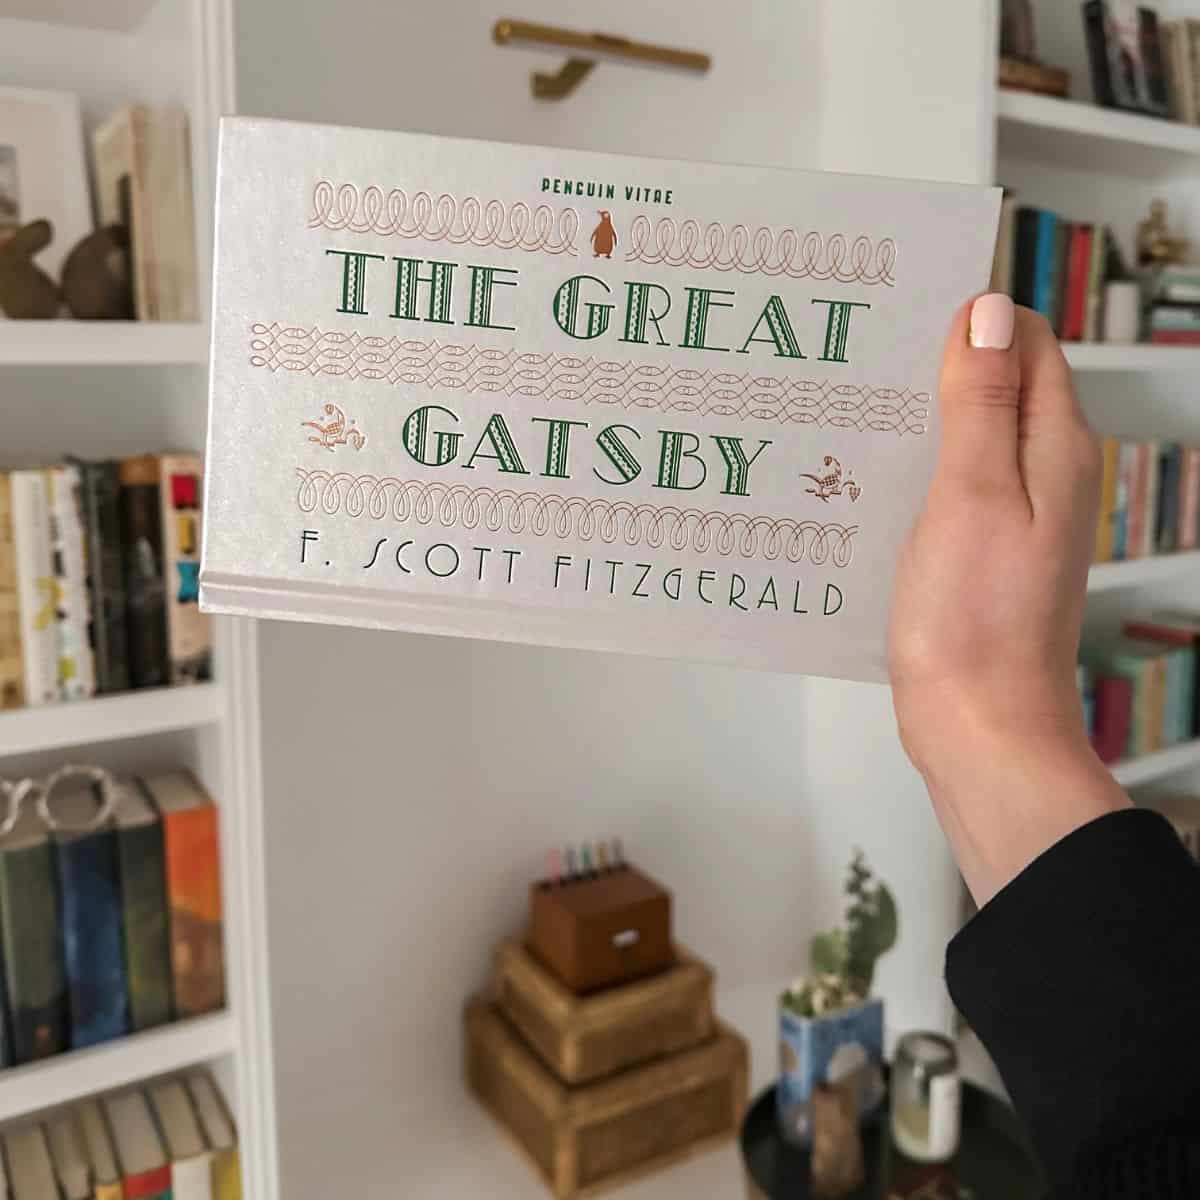 25 The Great Gatsby Quotes About Love (With Chapter Numbers)